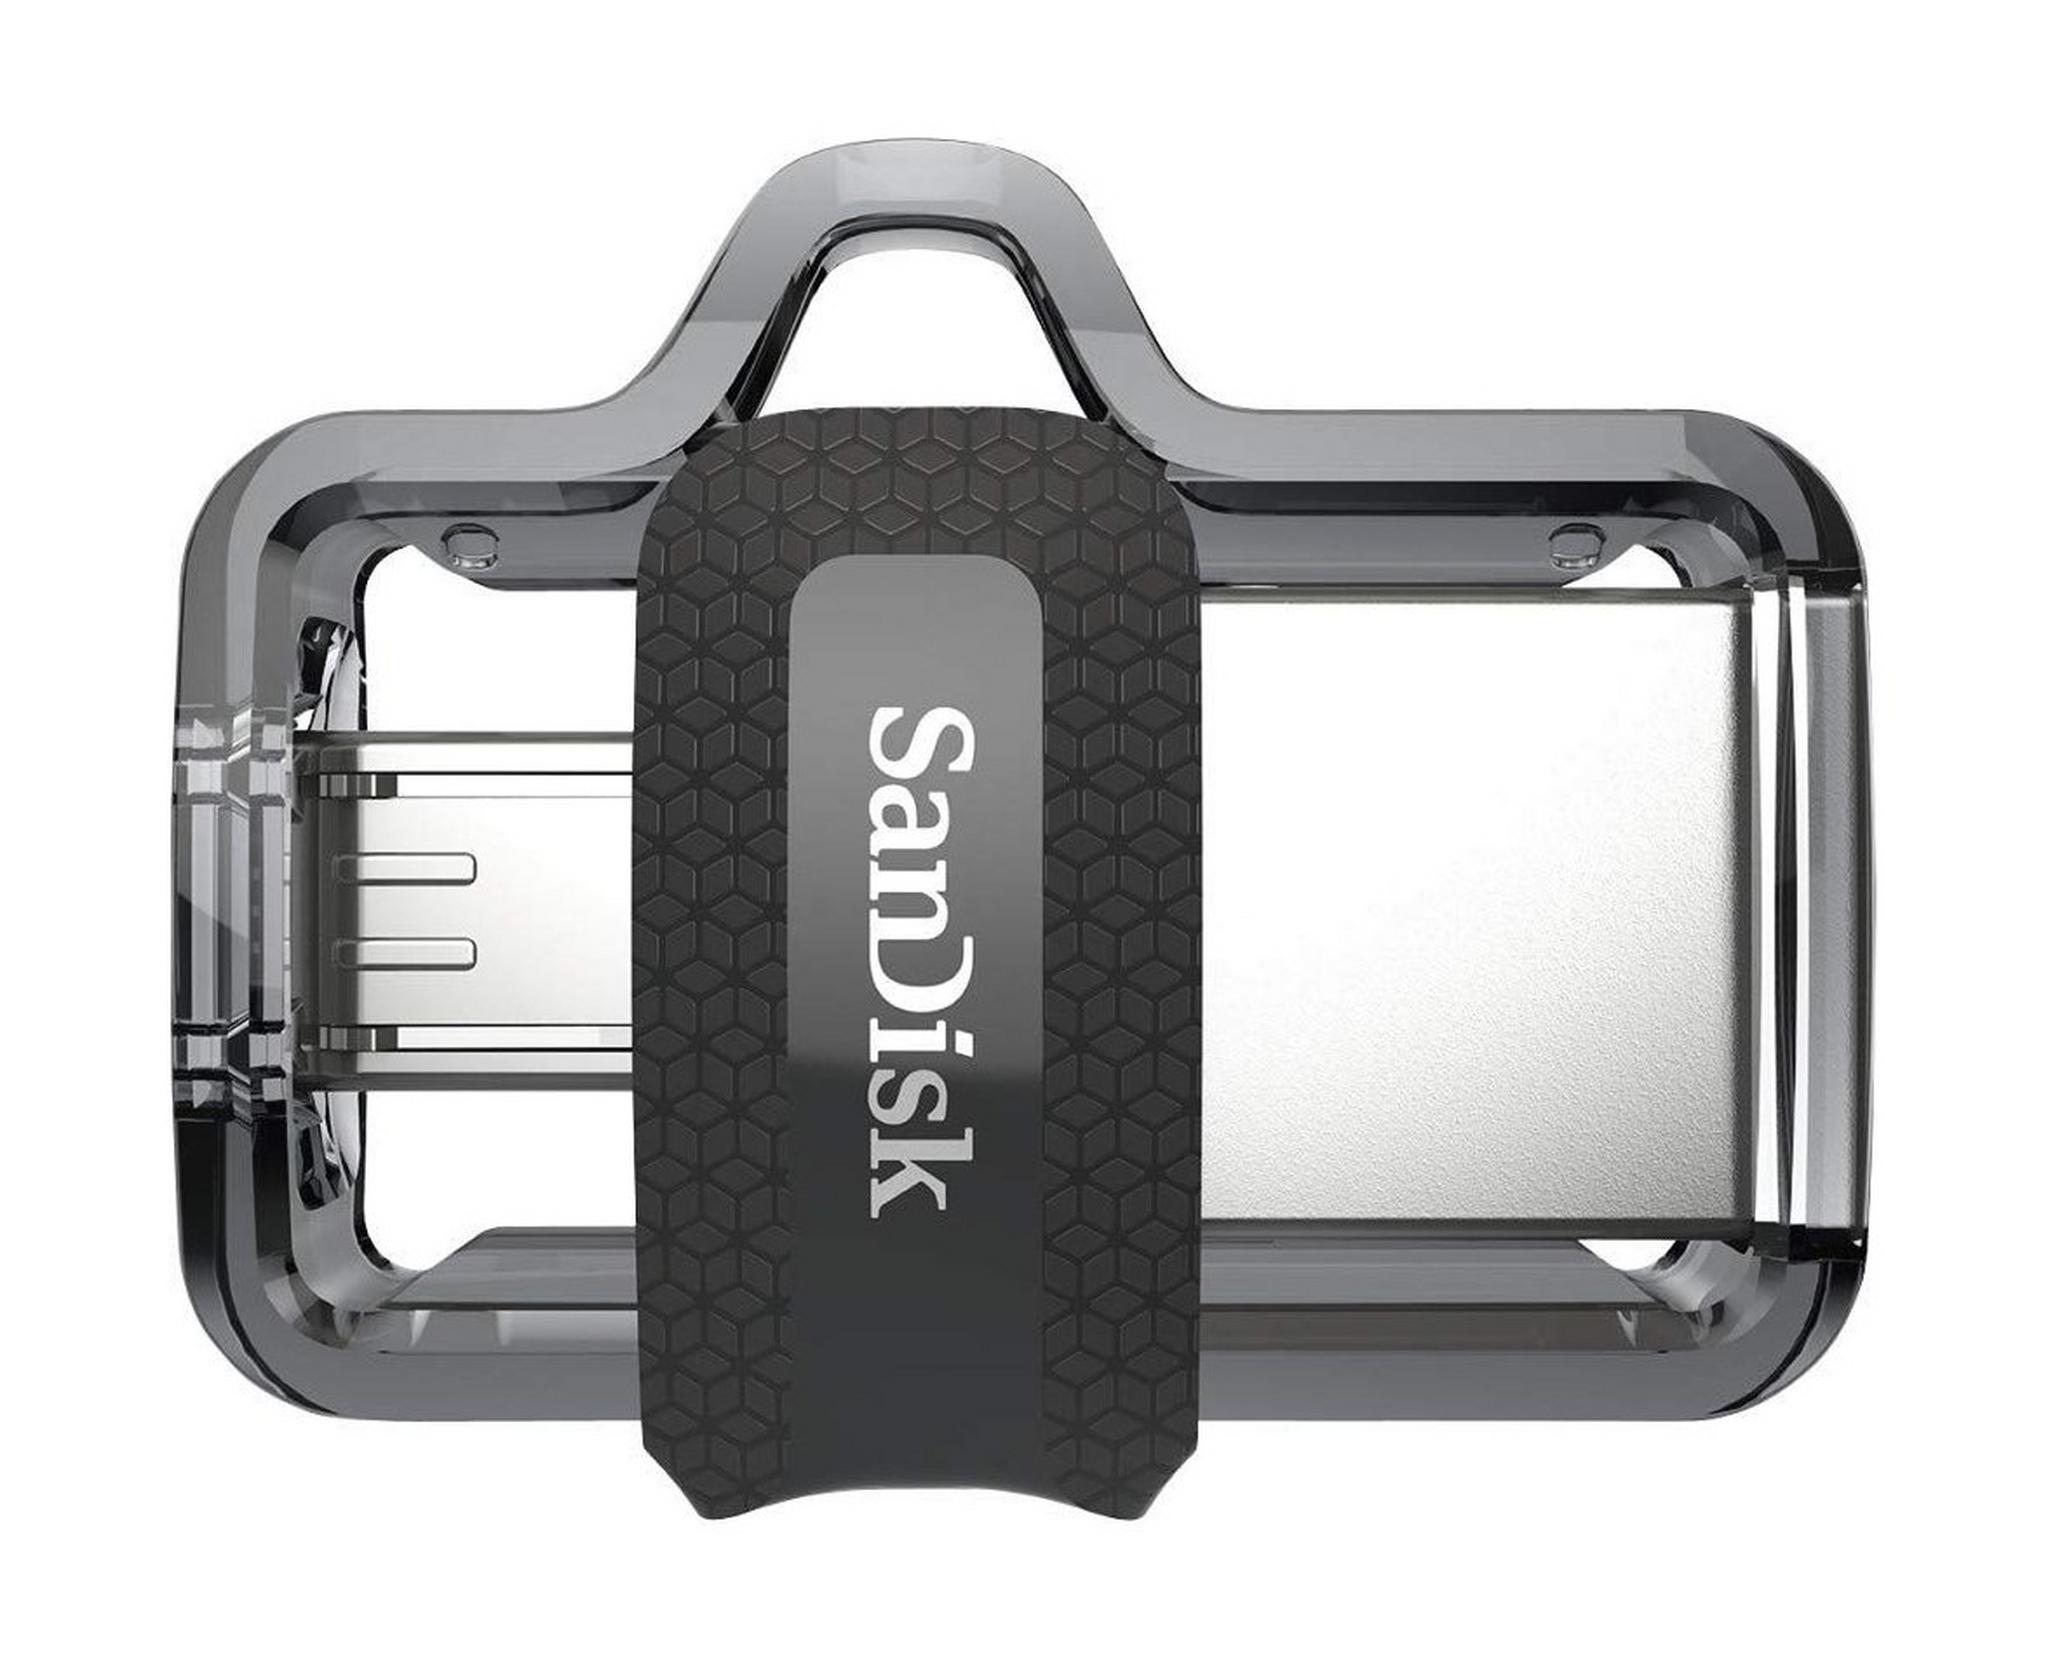 Sandisk 128GB M3.0 Dual USB Drive for Android Devices & Computer - (SDDD3-256G-G46)